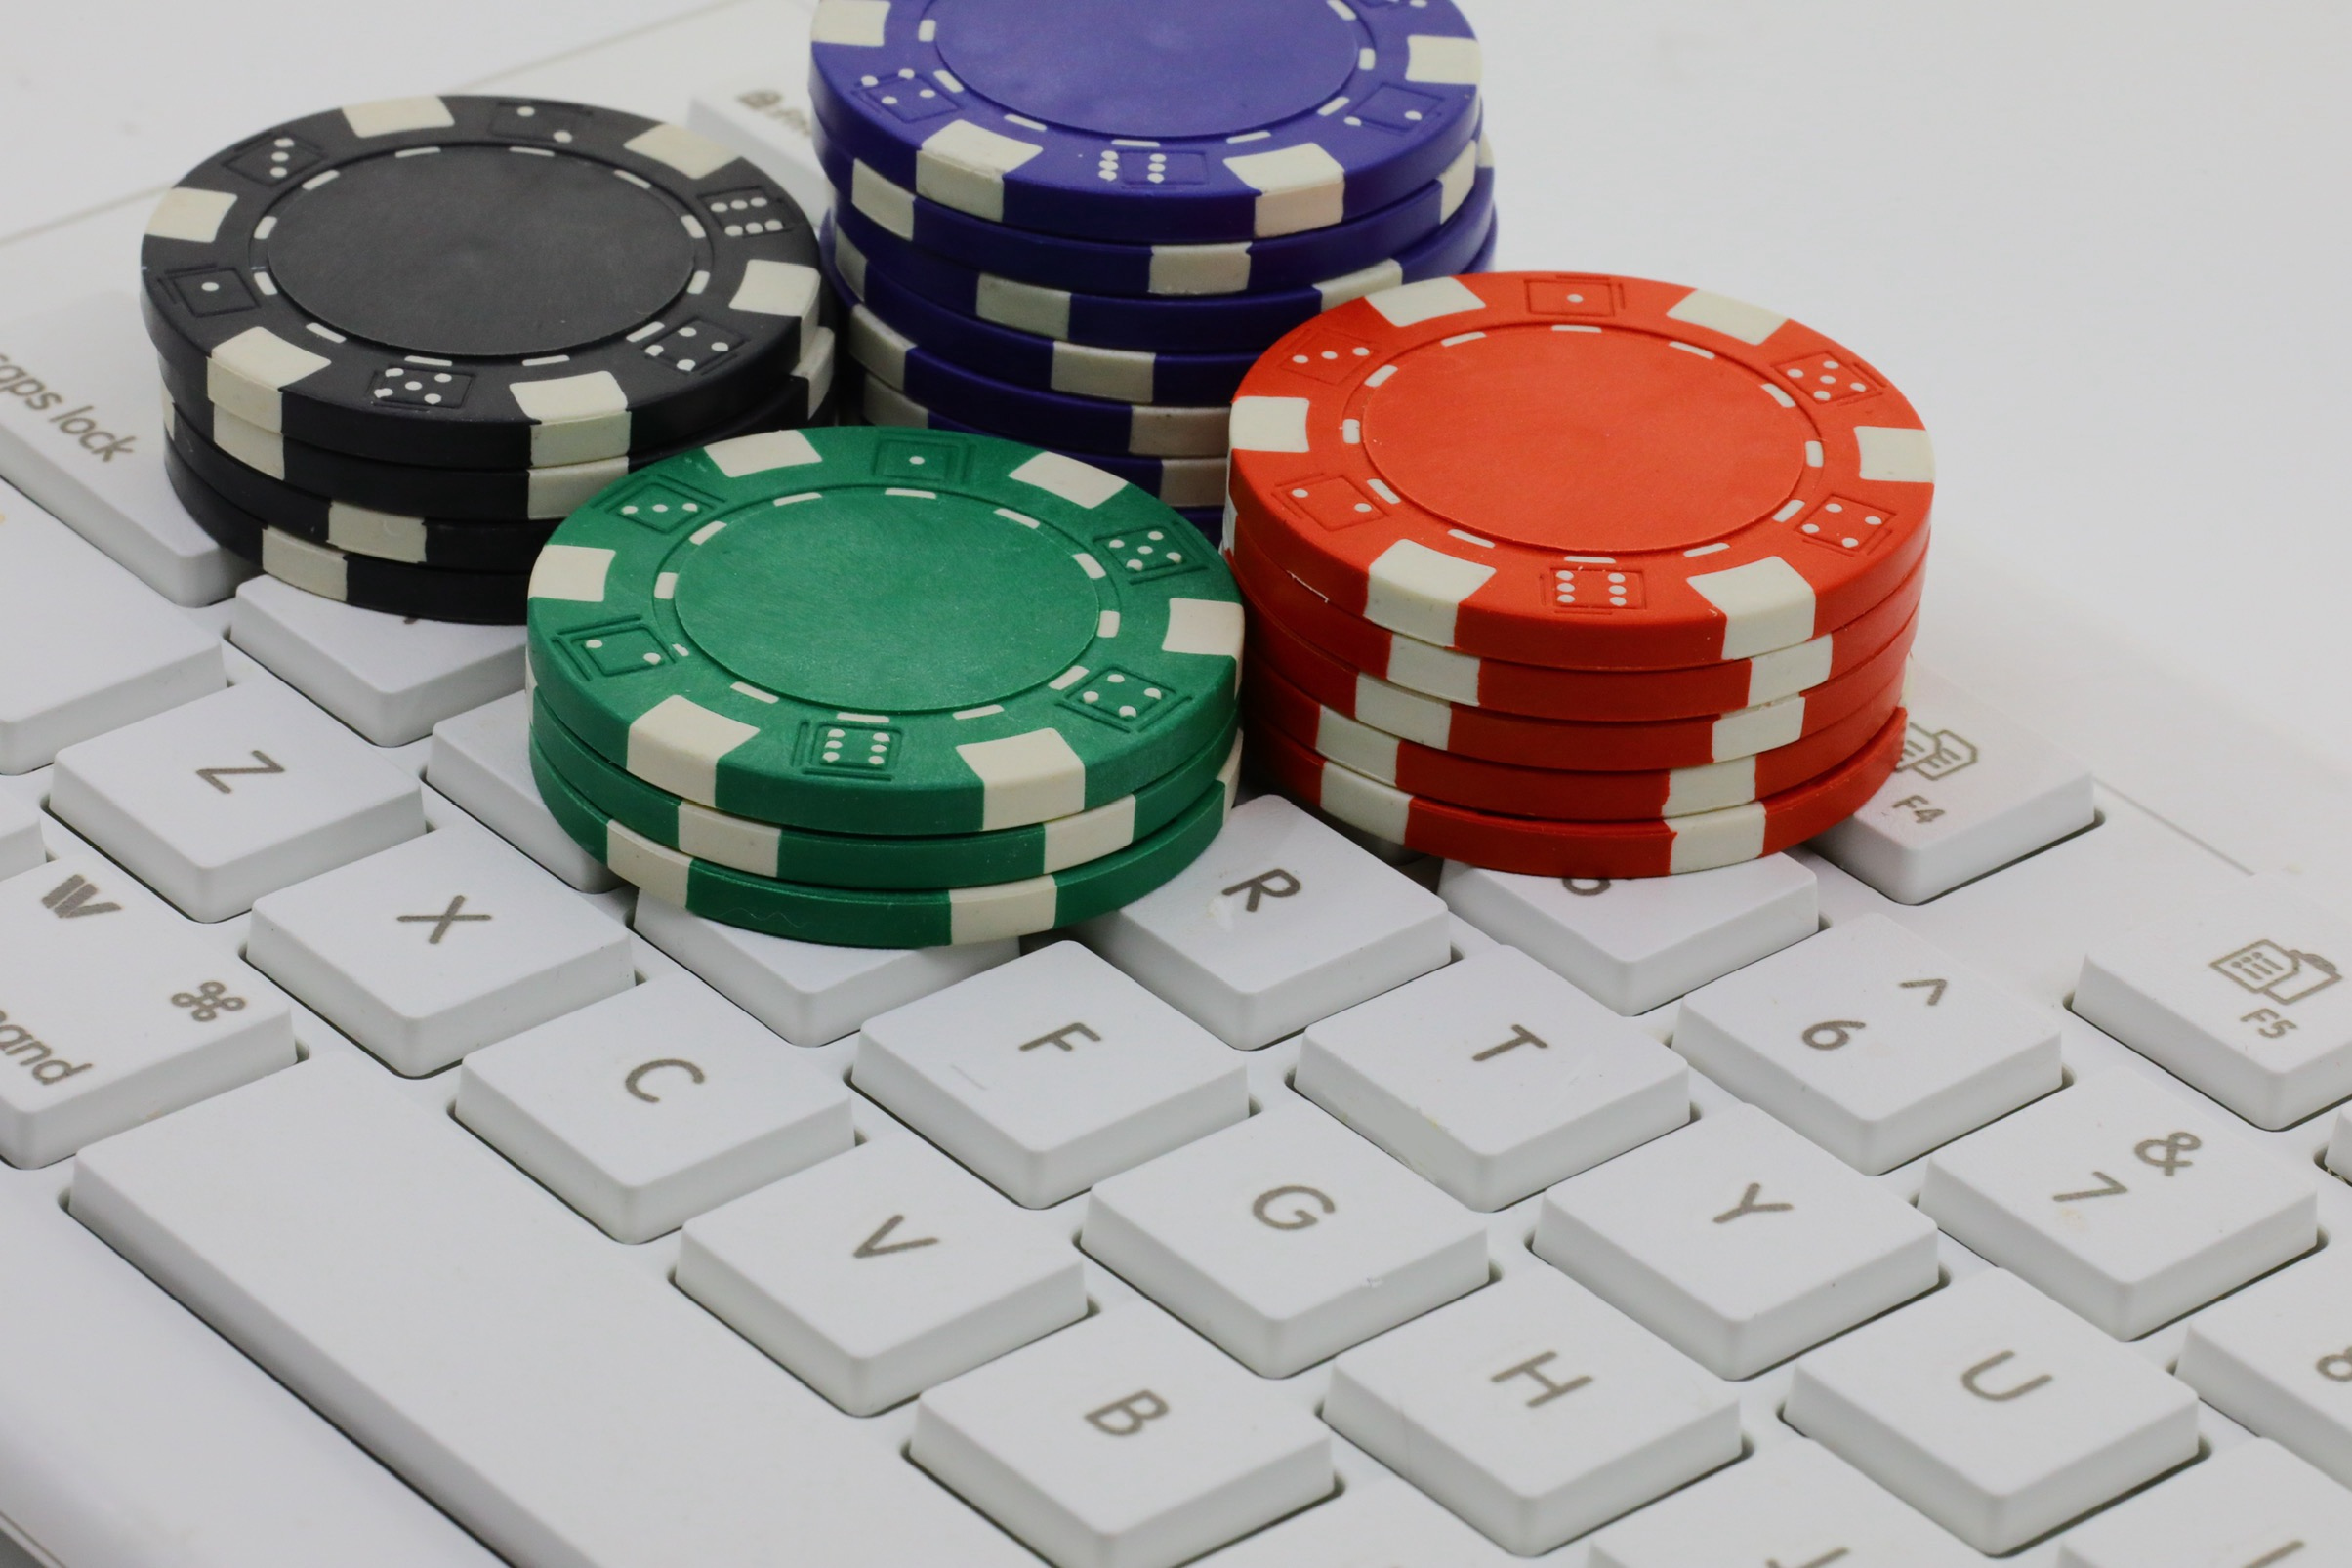 Cracking The Features of using bitcoin in online casinos Code